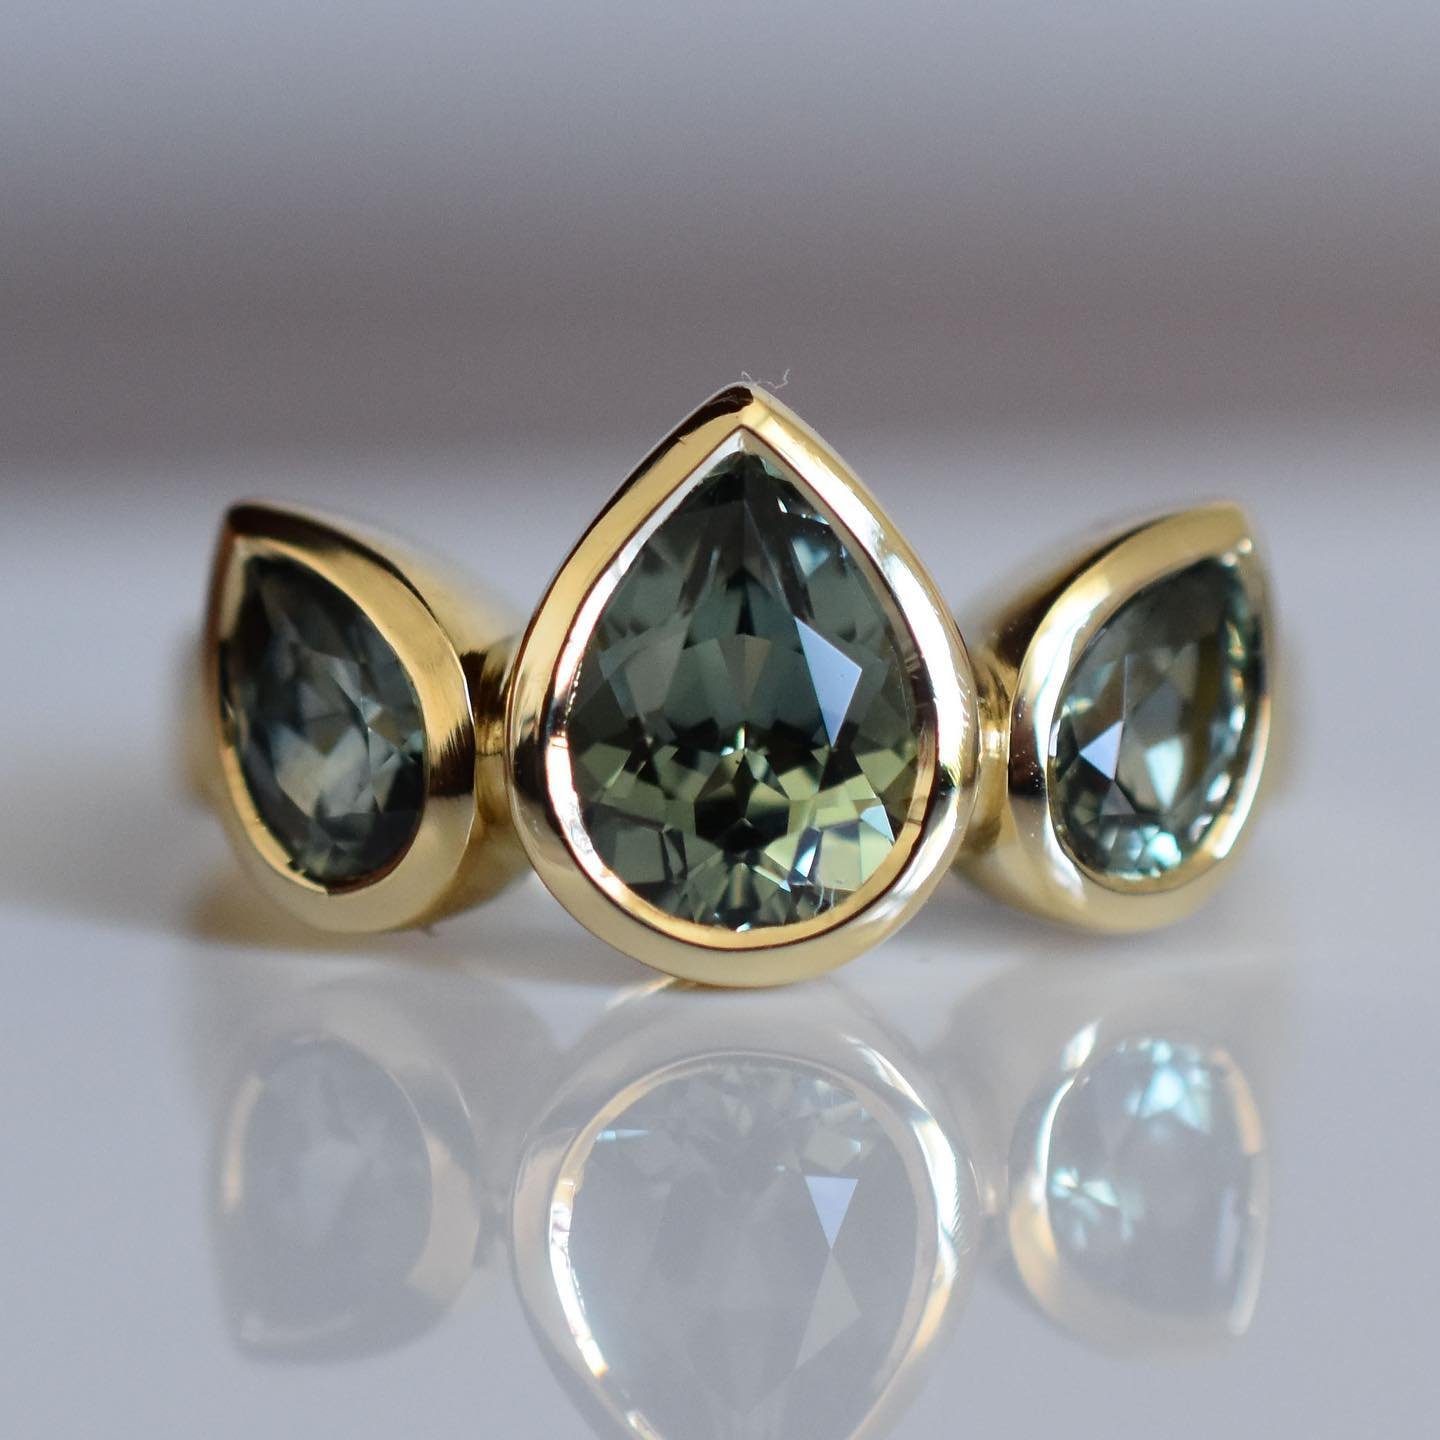 Brand new triple green pear Pallenberg ring ✨✨✨ thought I&rsquo;d switch things up and use these incredible Australian origin green sapphires. What do you think? 
She&rsquo;s available, but not online yet. Please email or DM
😘😘😘
.
.
.
#greensapphi